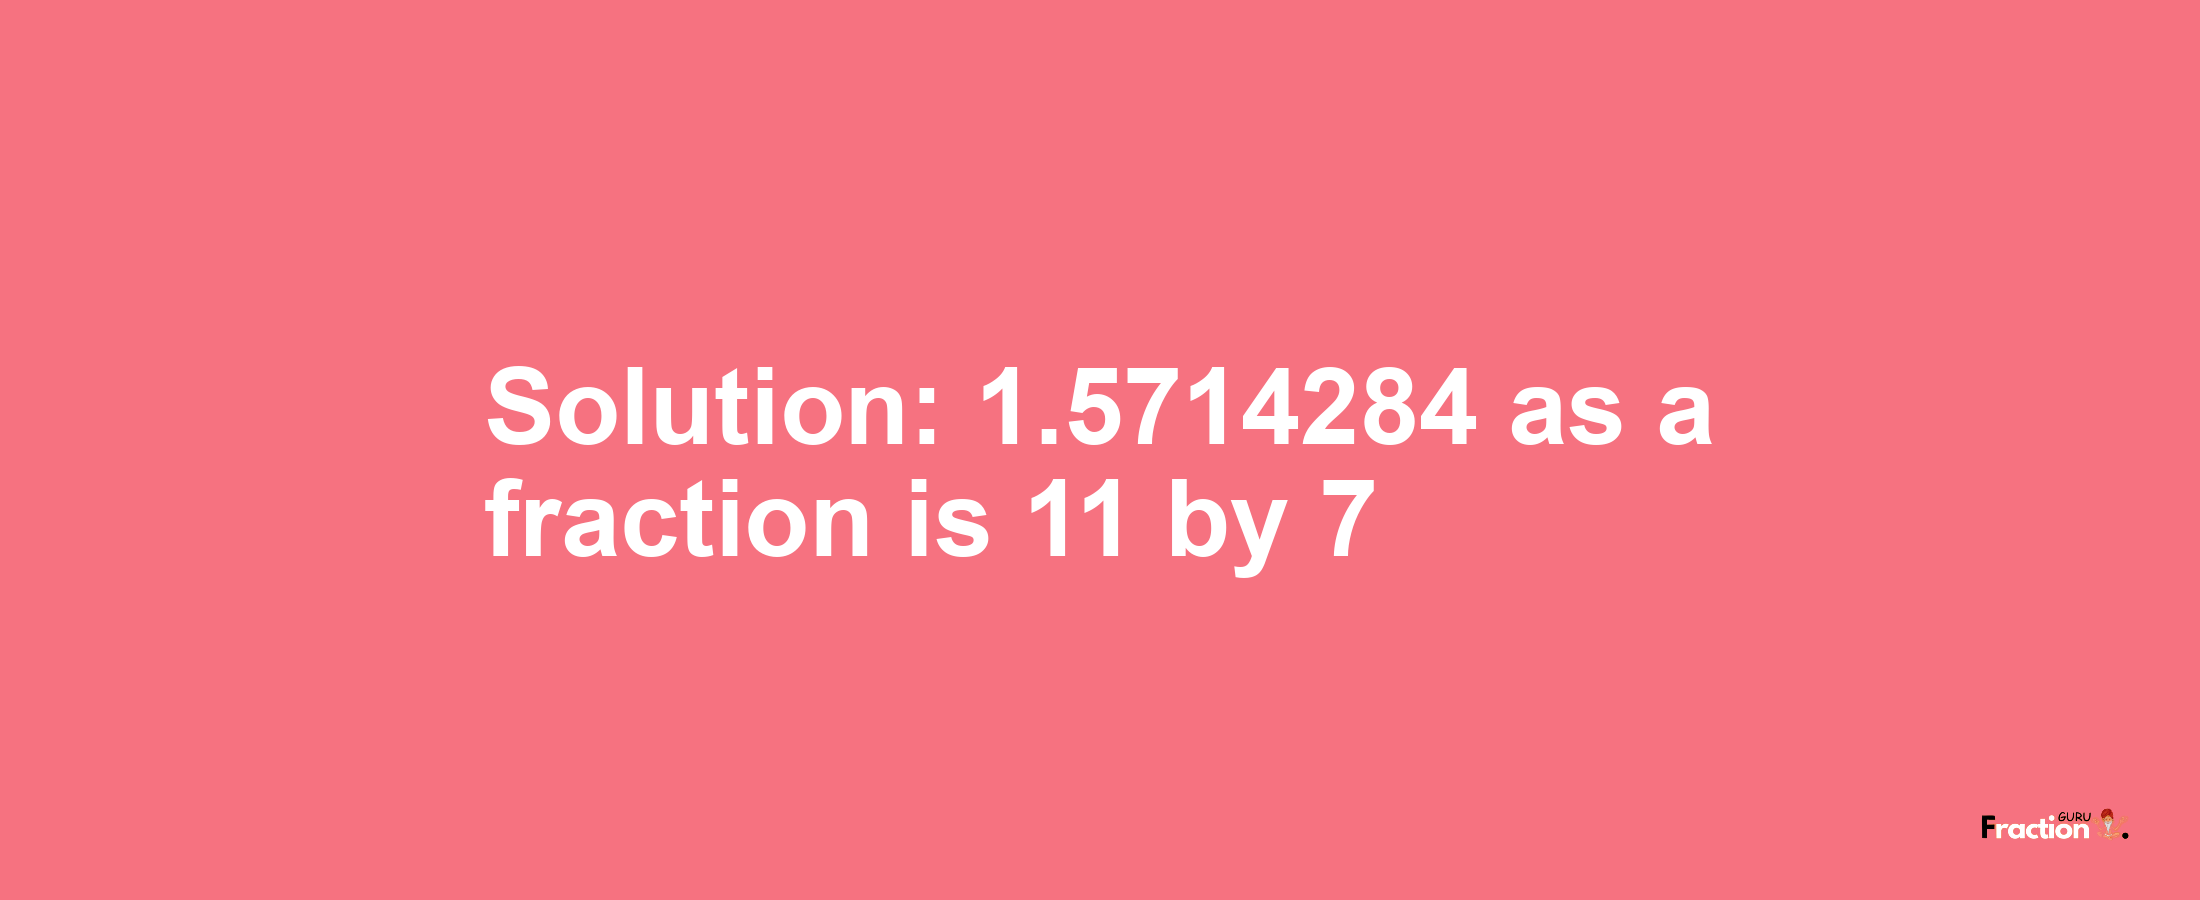 Solution:1.5714284 as a fraction is 11/7